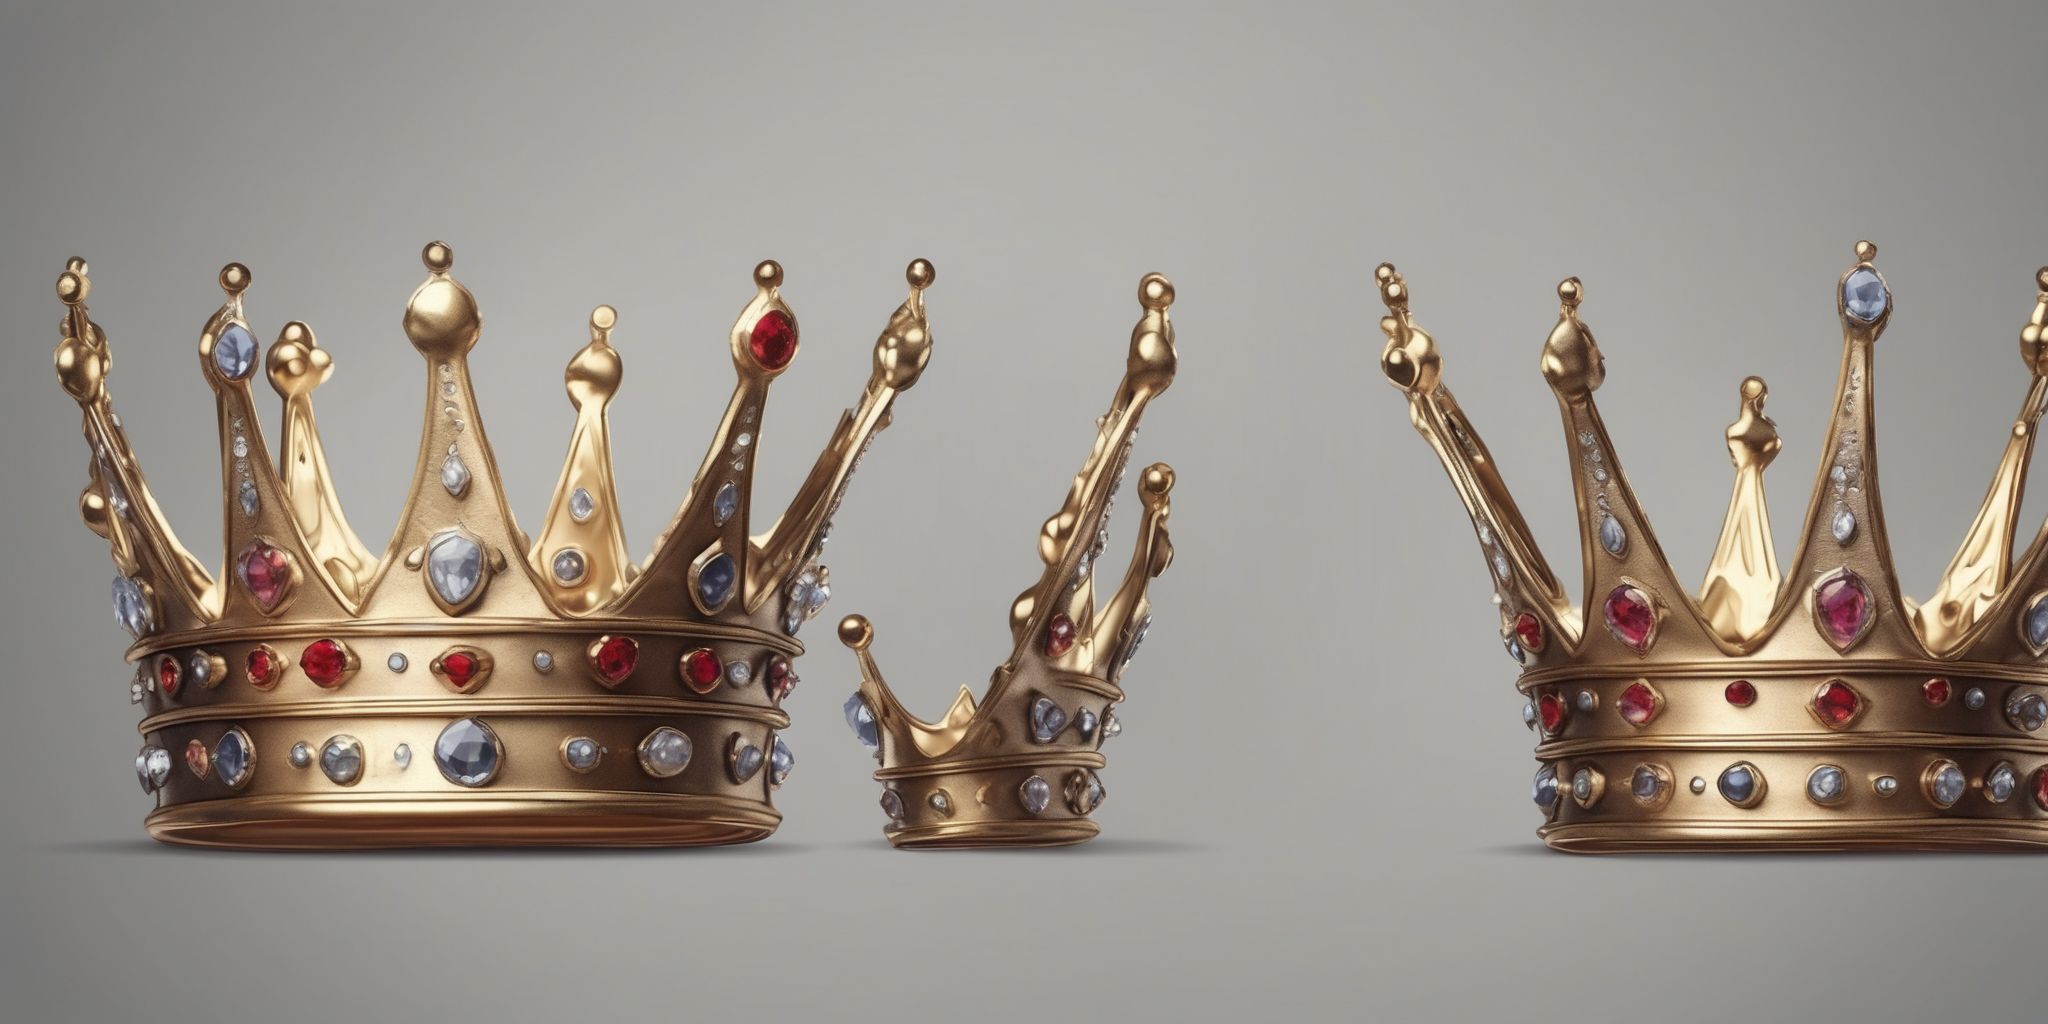 Crown  in realistic, photographic style